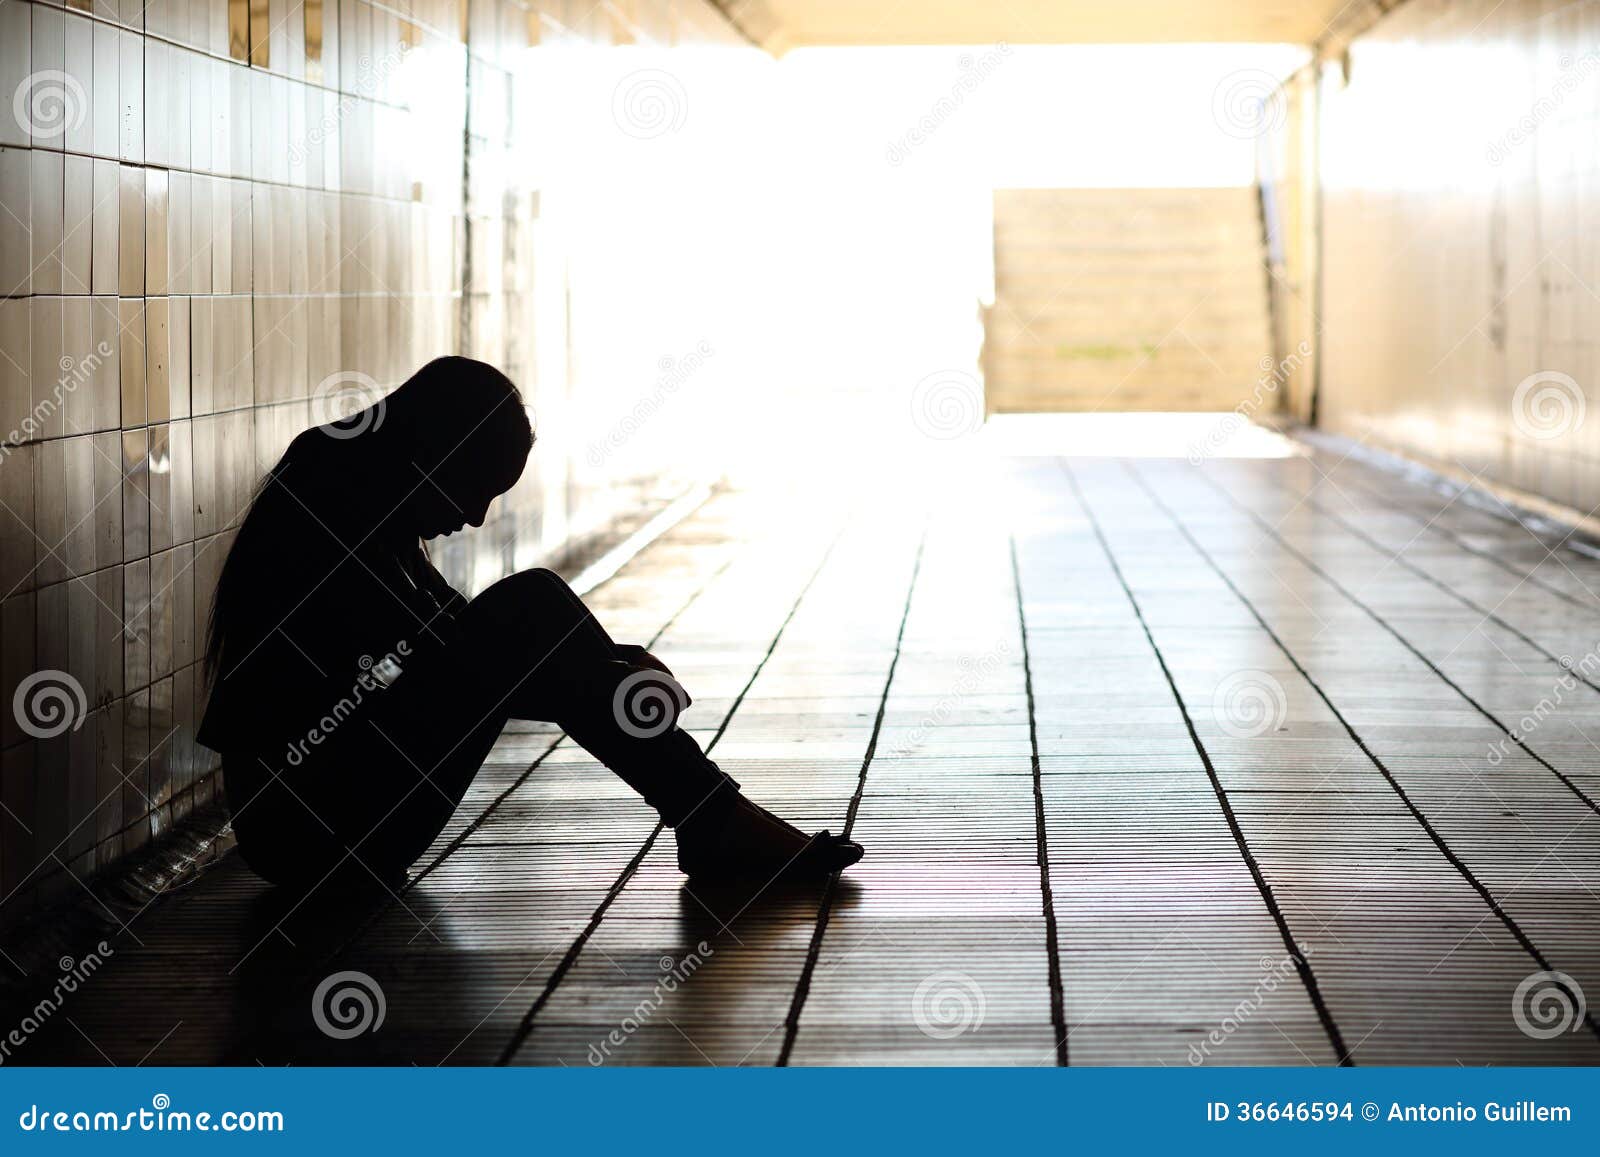 teenager depressed sitting inside a dirty tunnel